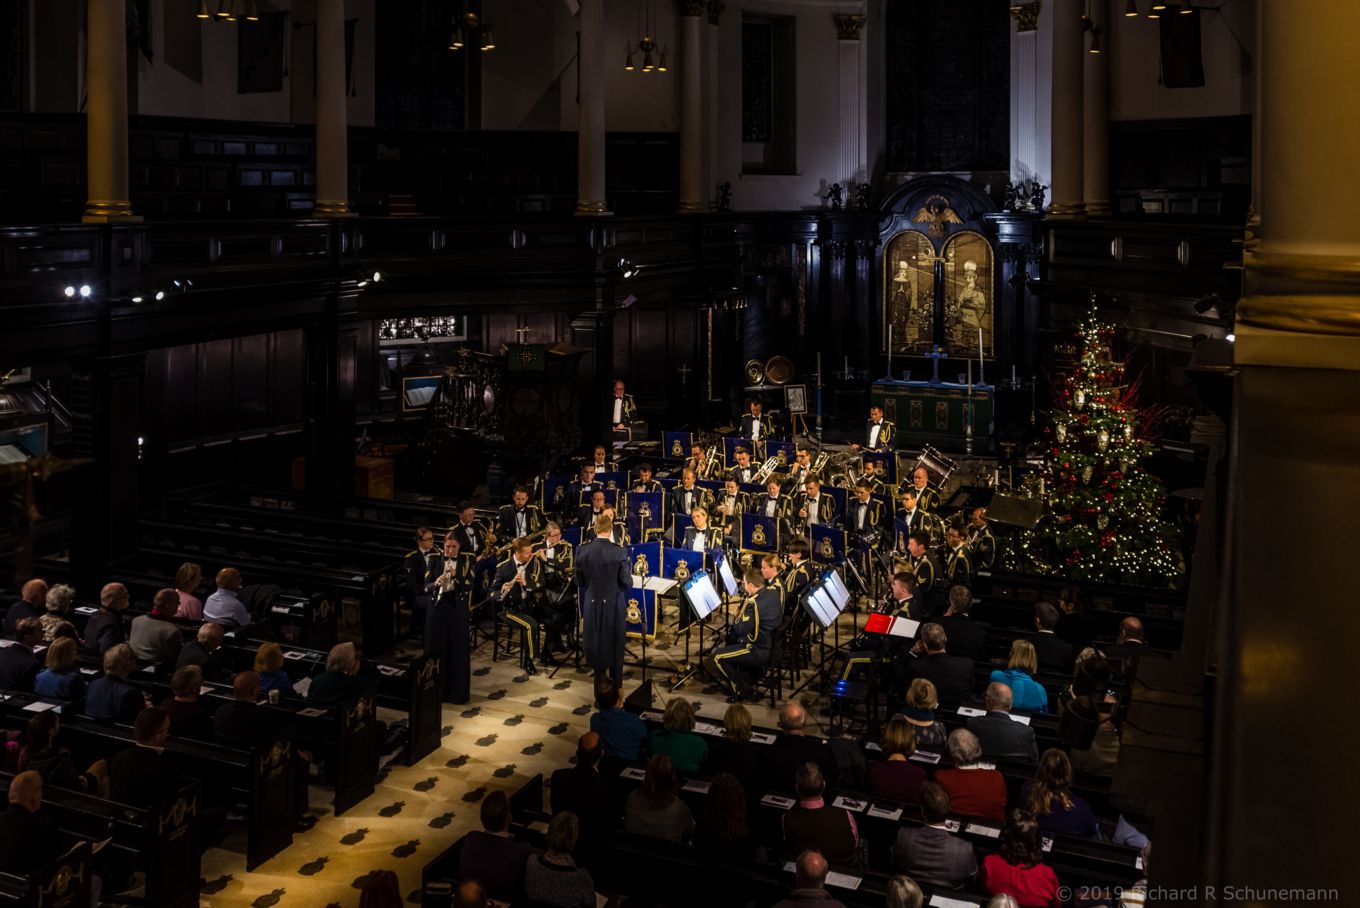 A military band perform a concert in a packed church.